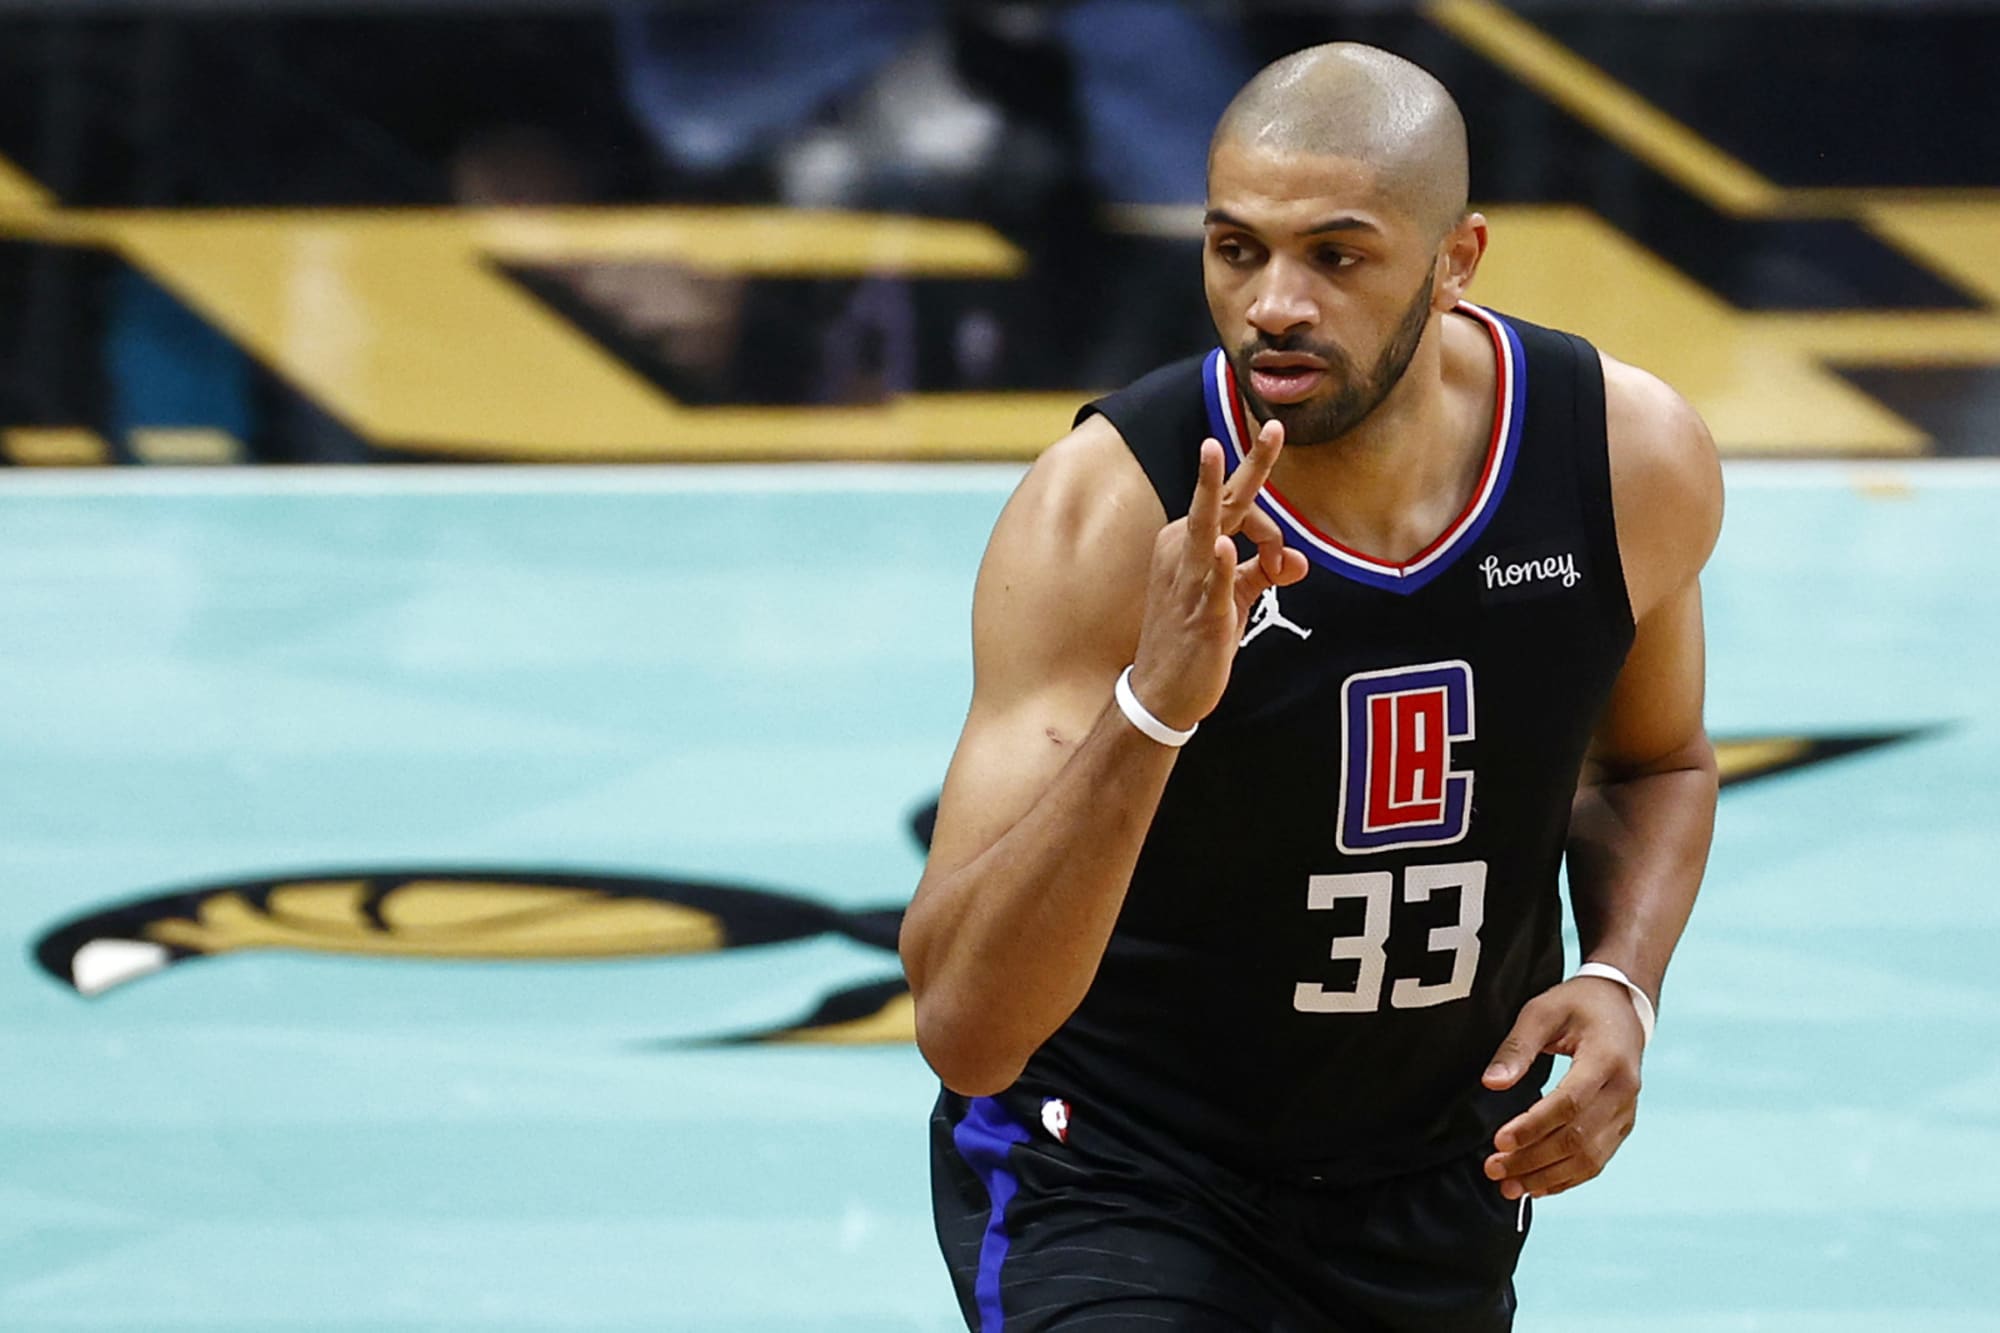 Report: Nicolas Batum to sign with Clippers after clearing waivers